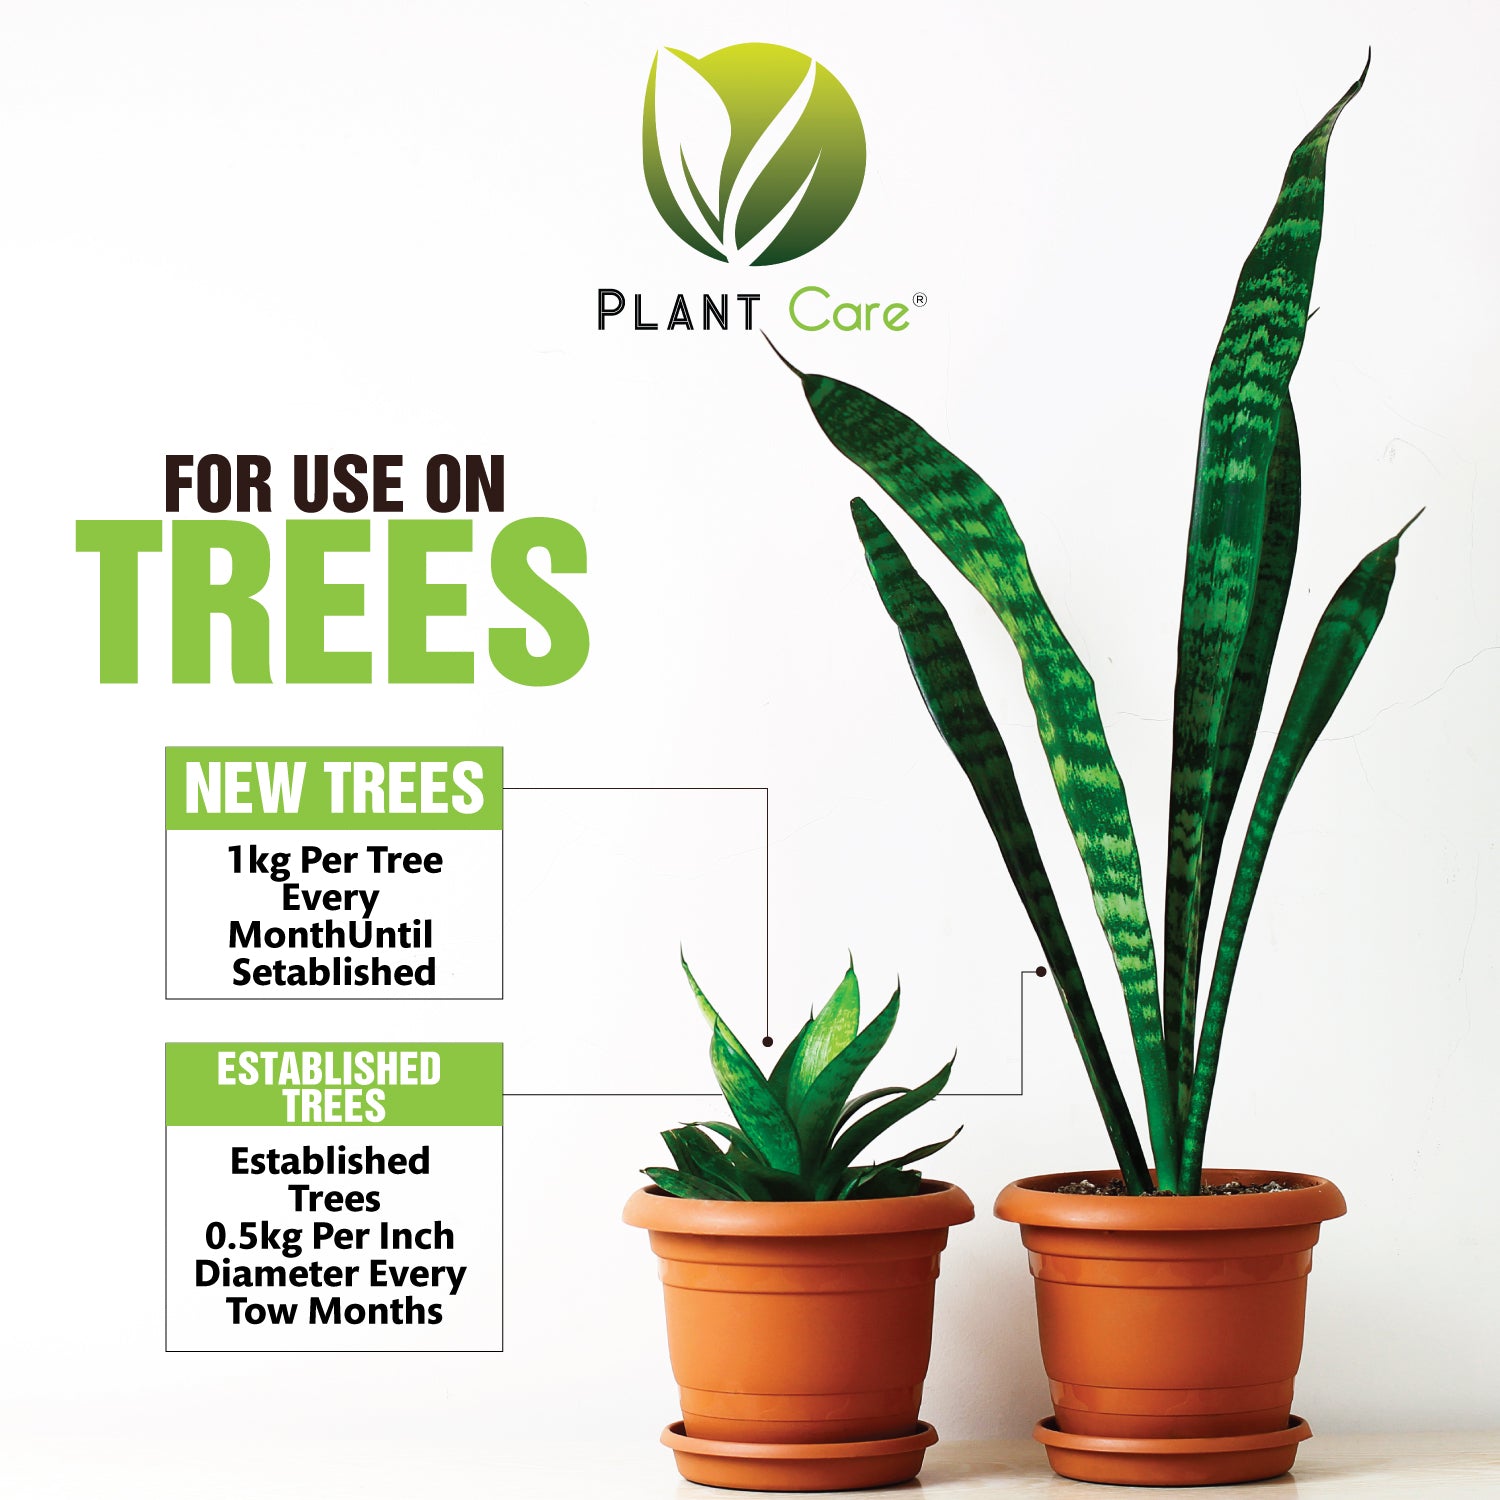 Grow healthier plants with our 100% organic vermi compost